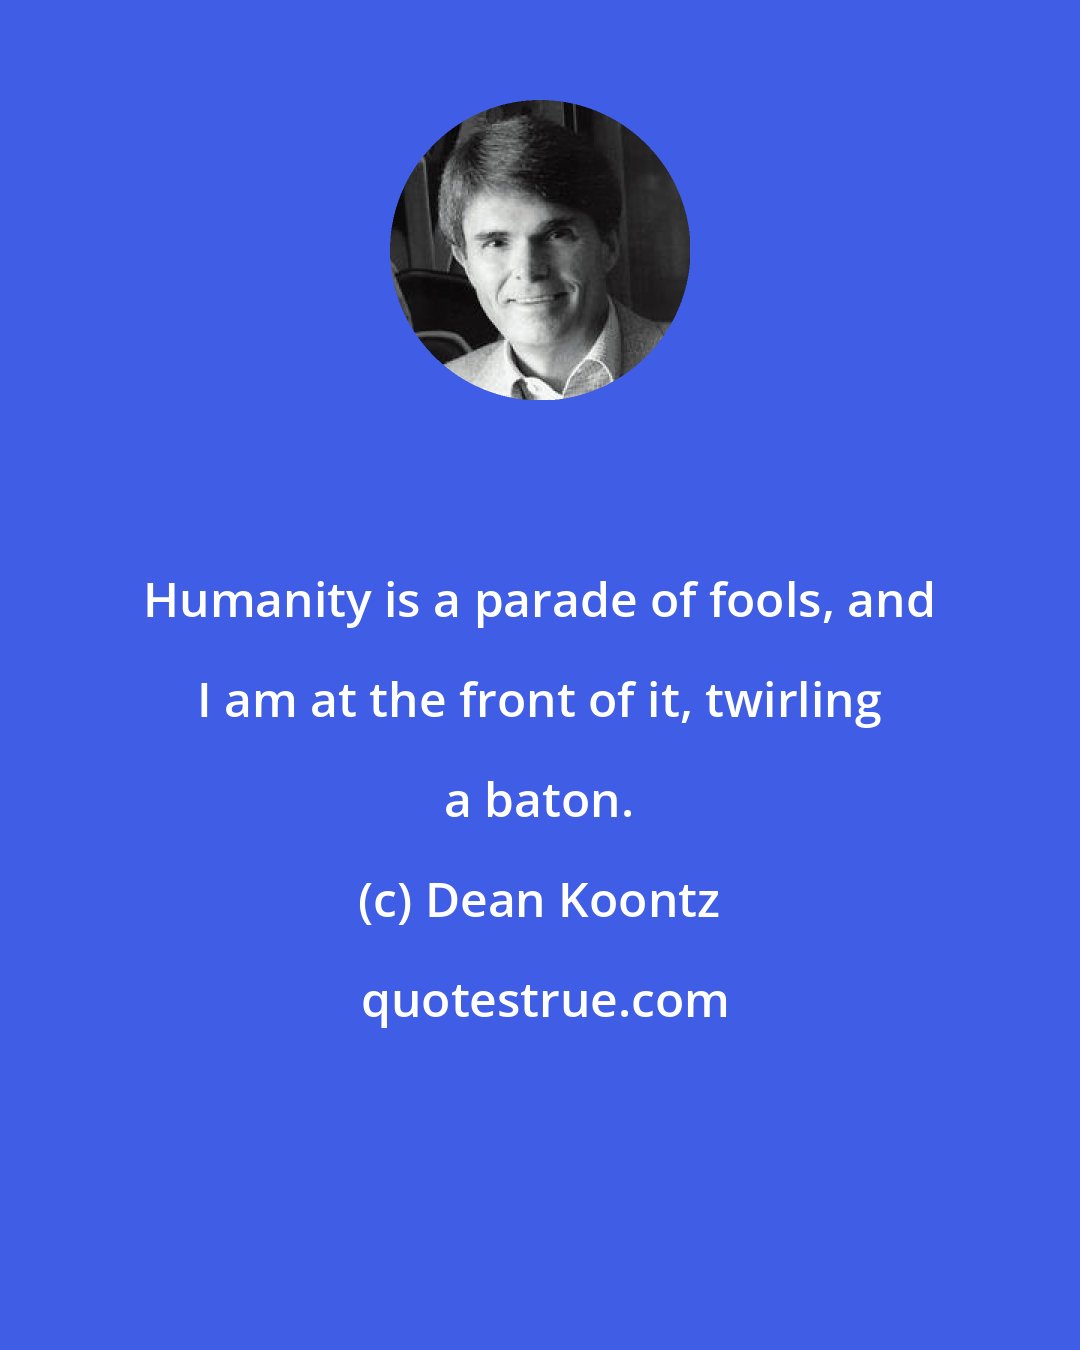 Dean Koontz: Humanity is a parade of fools, and I am at the front of it, twirling a baton.